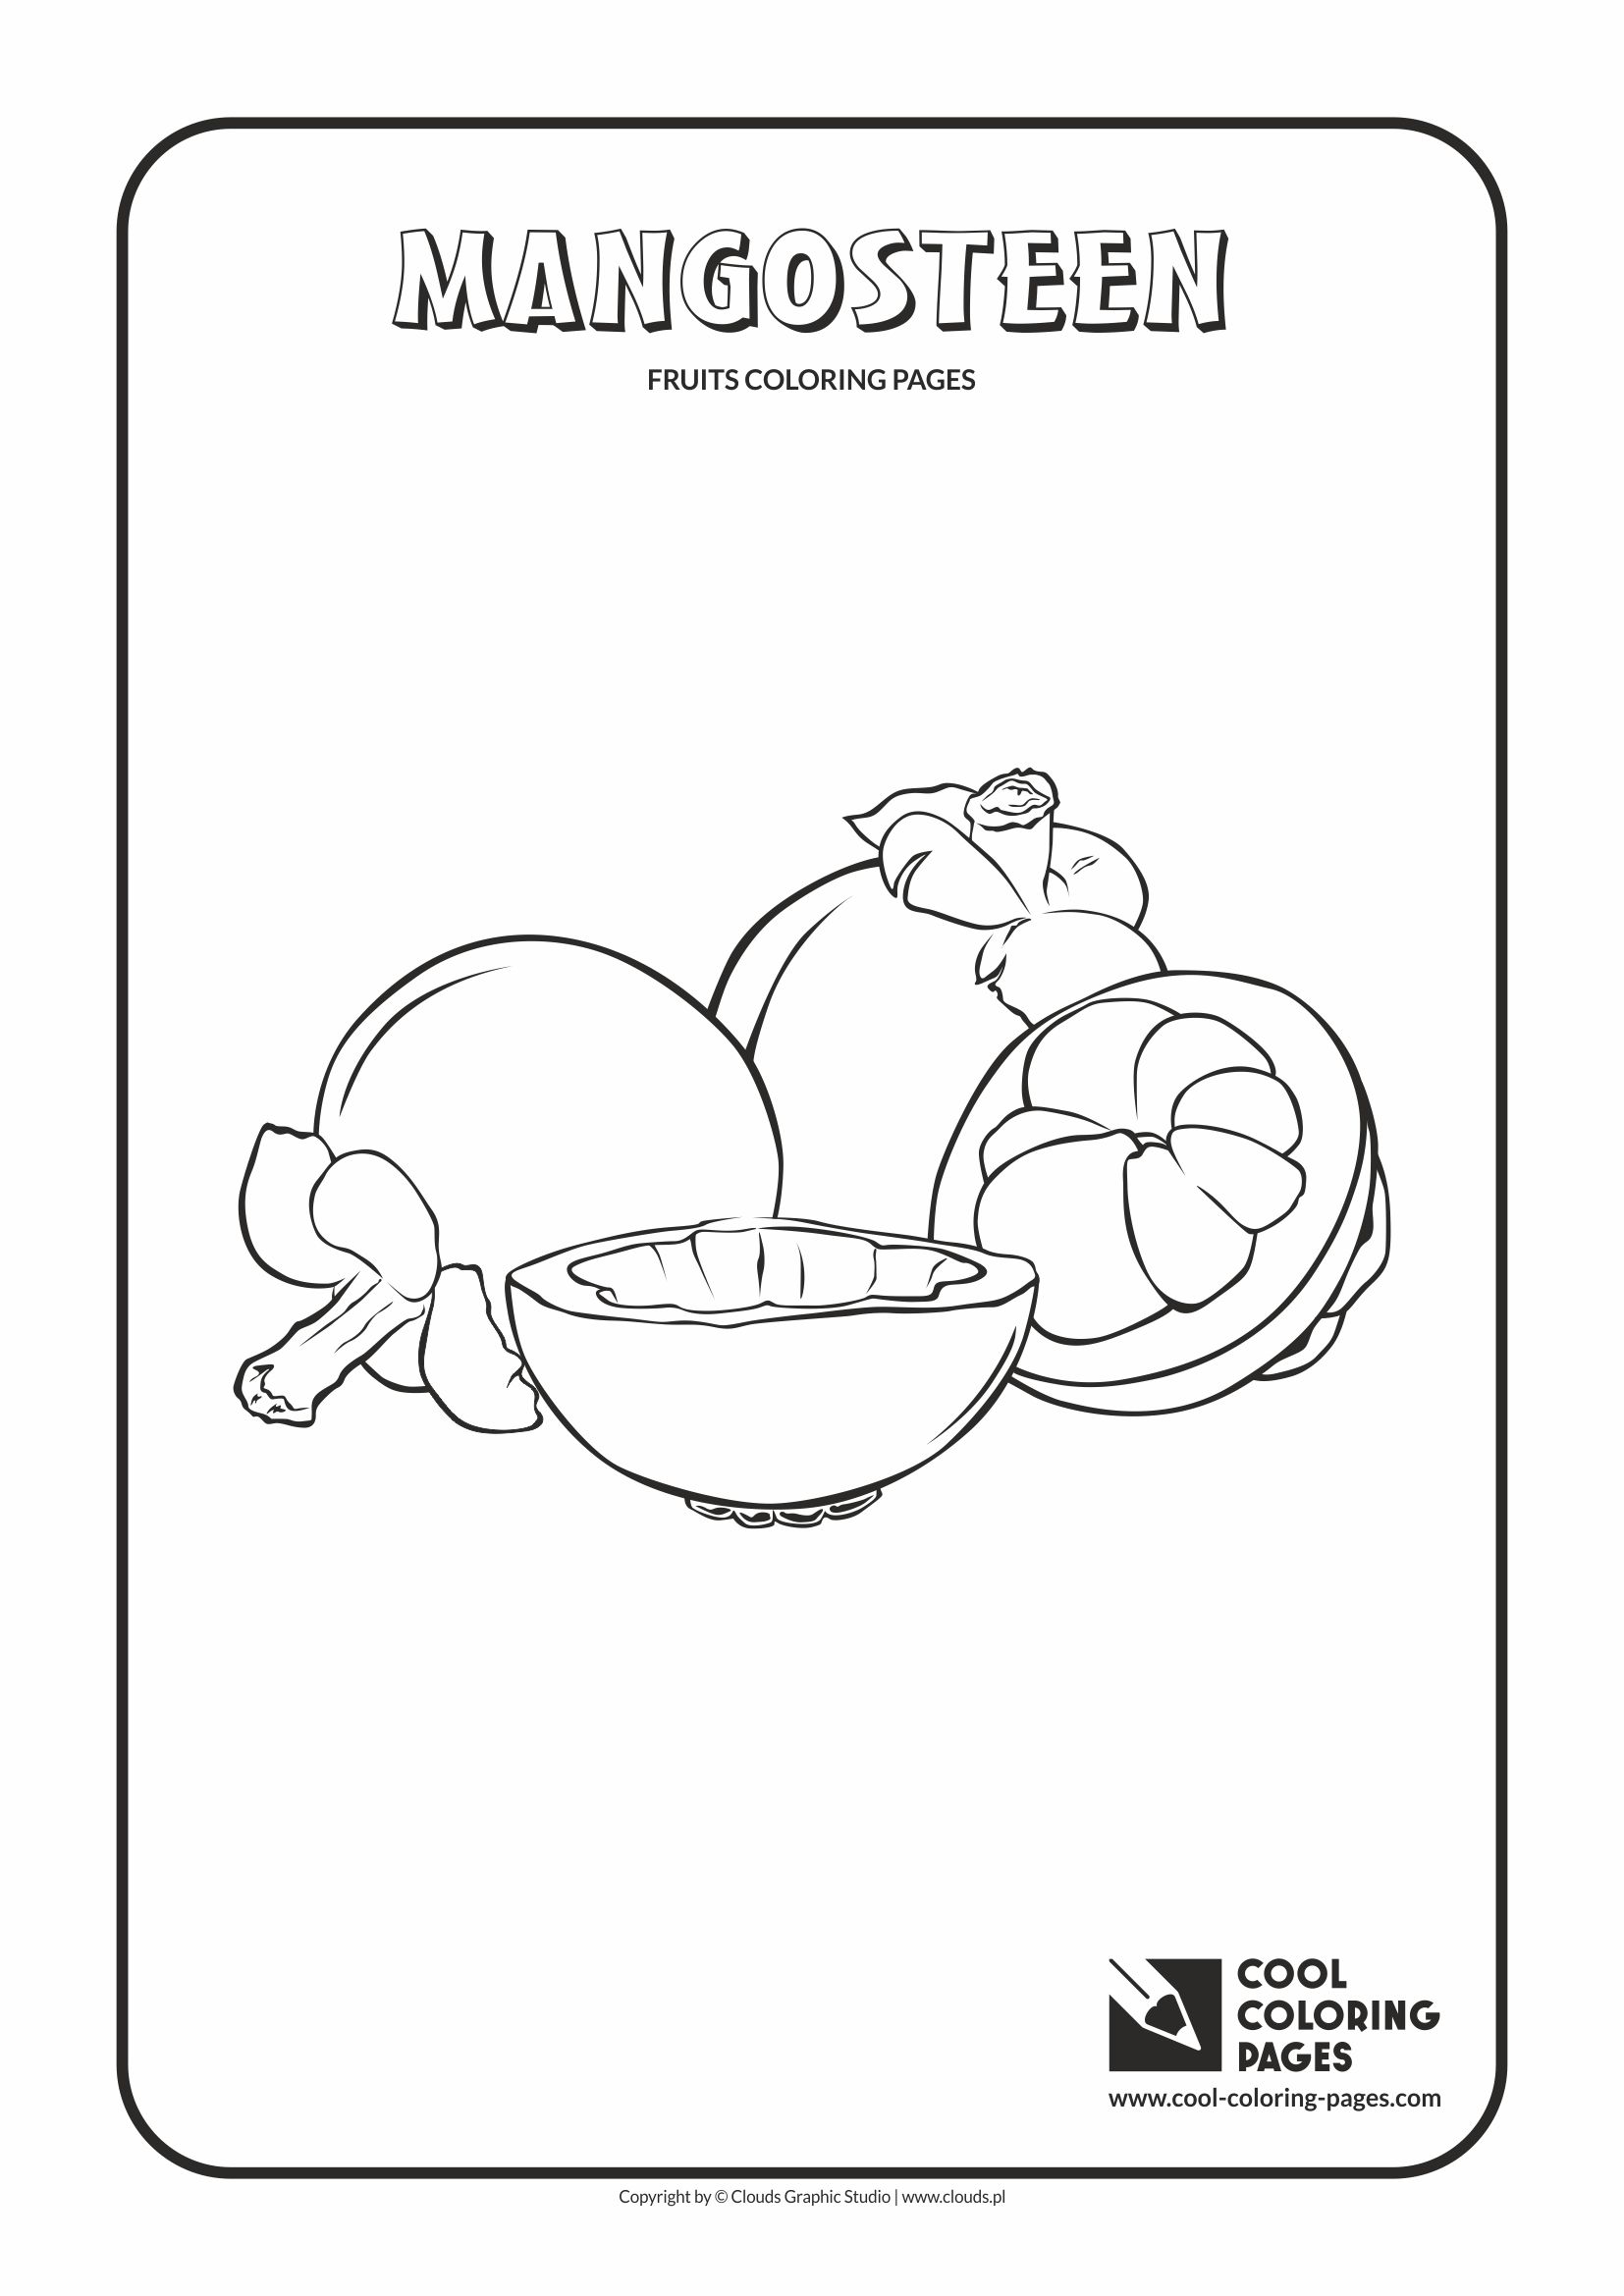 Cool Coloring Pages - Plants / Mangosteen / Coloring page with mangosteen